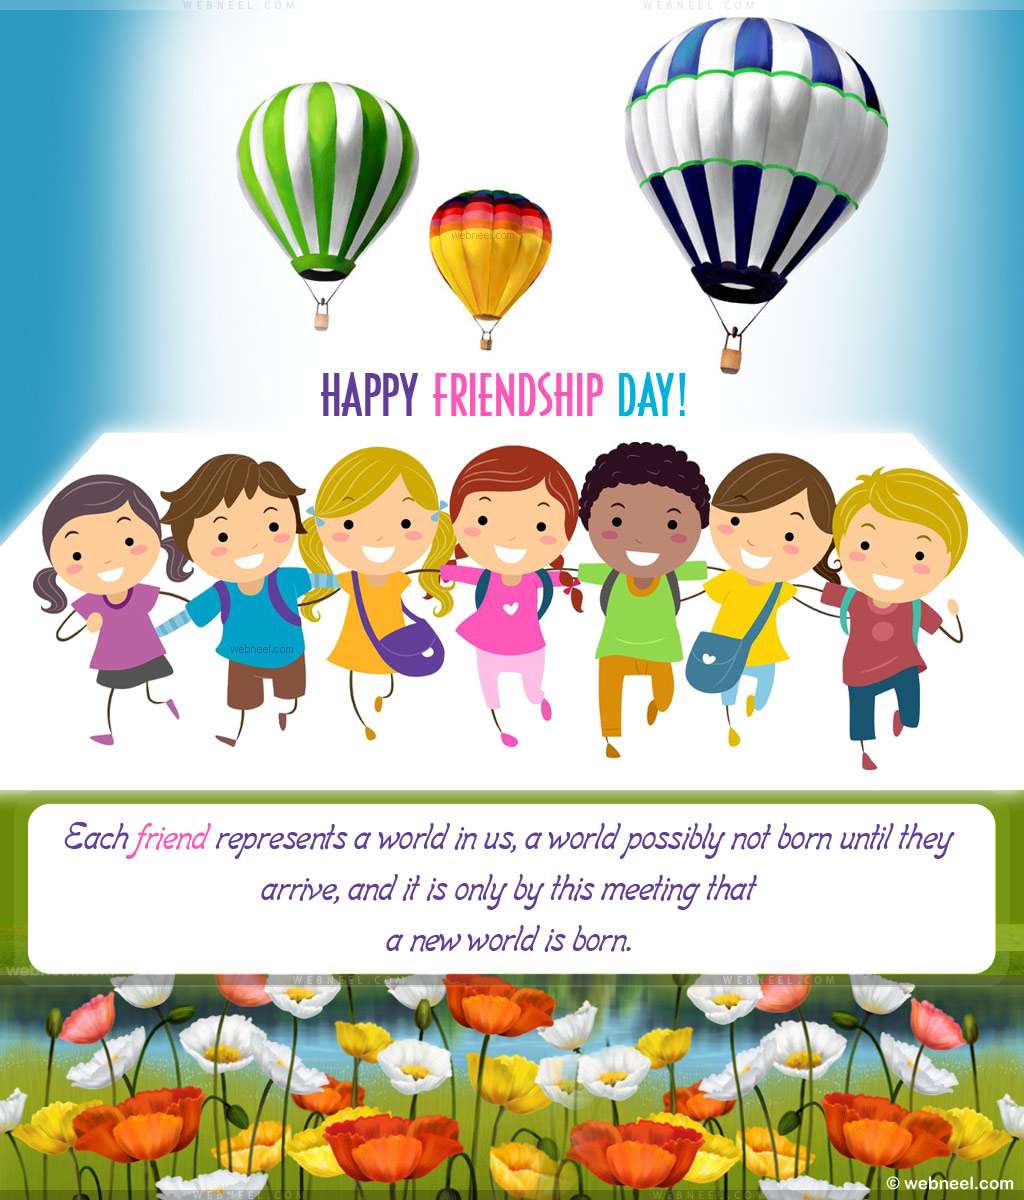 Happy Friendship Day Greetings - Children's Day Png - HD Wallpaper 